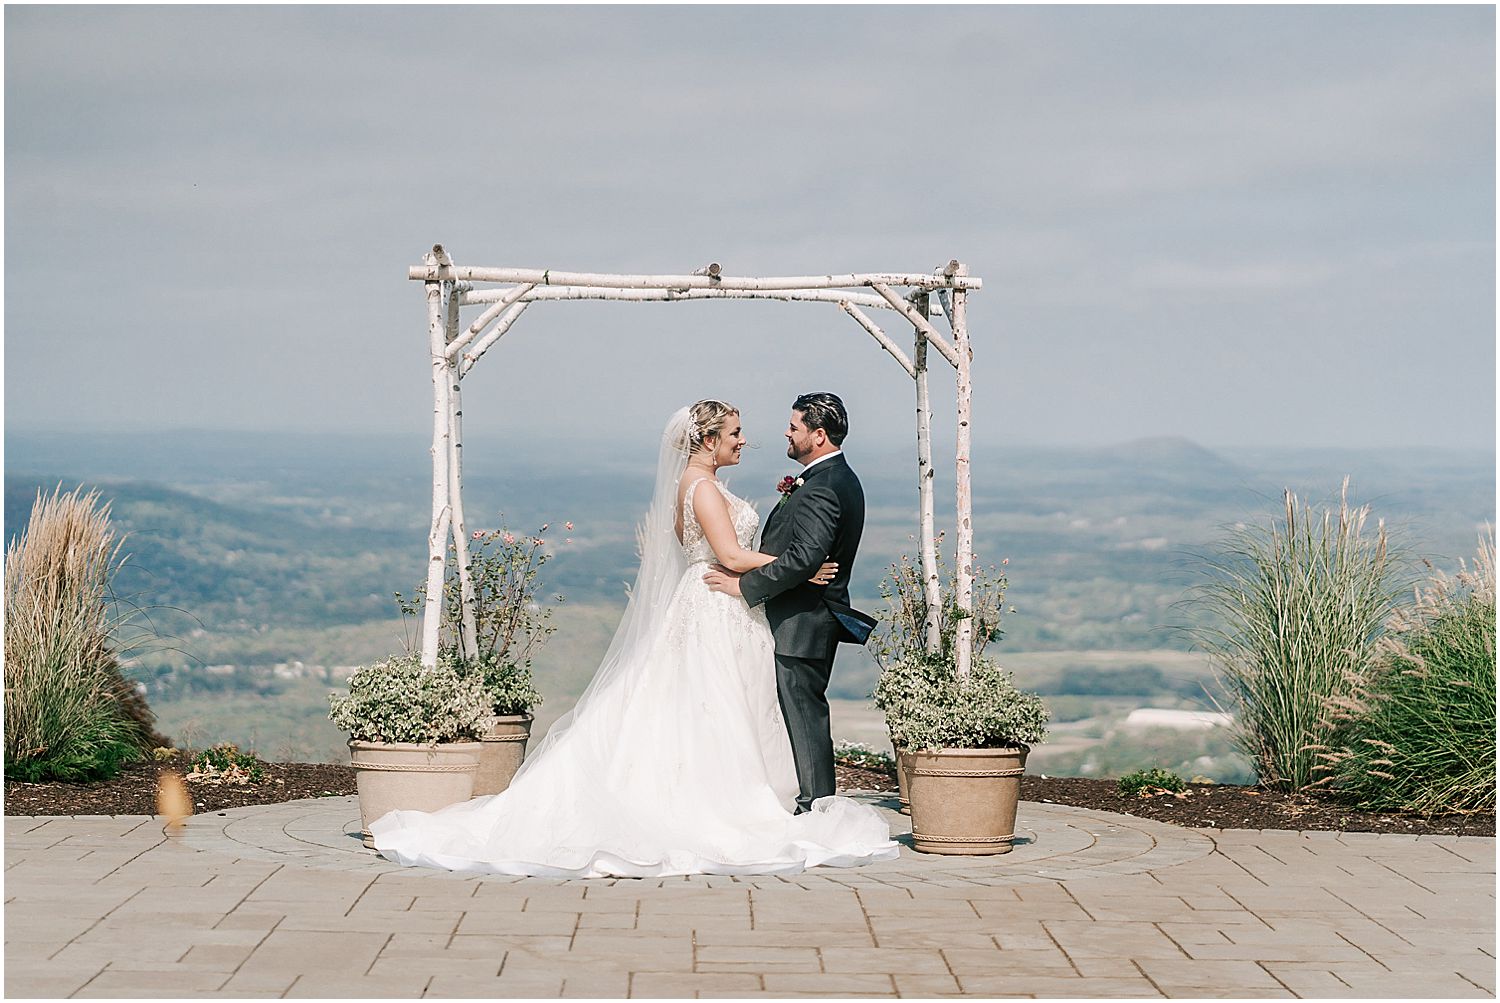 Capturing the lovely couple at this Mountain Creek Wedding